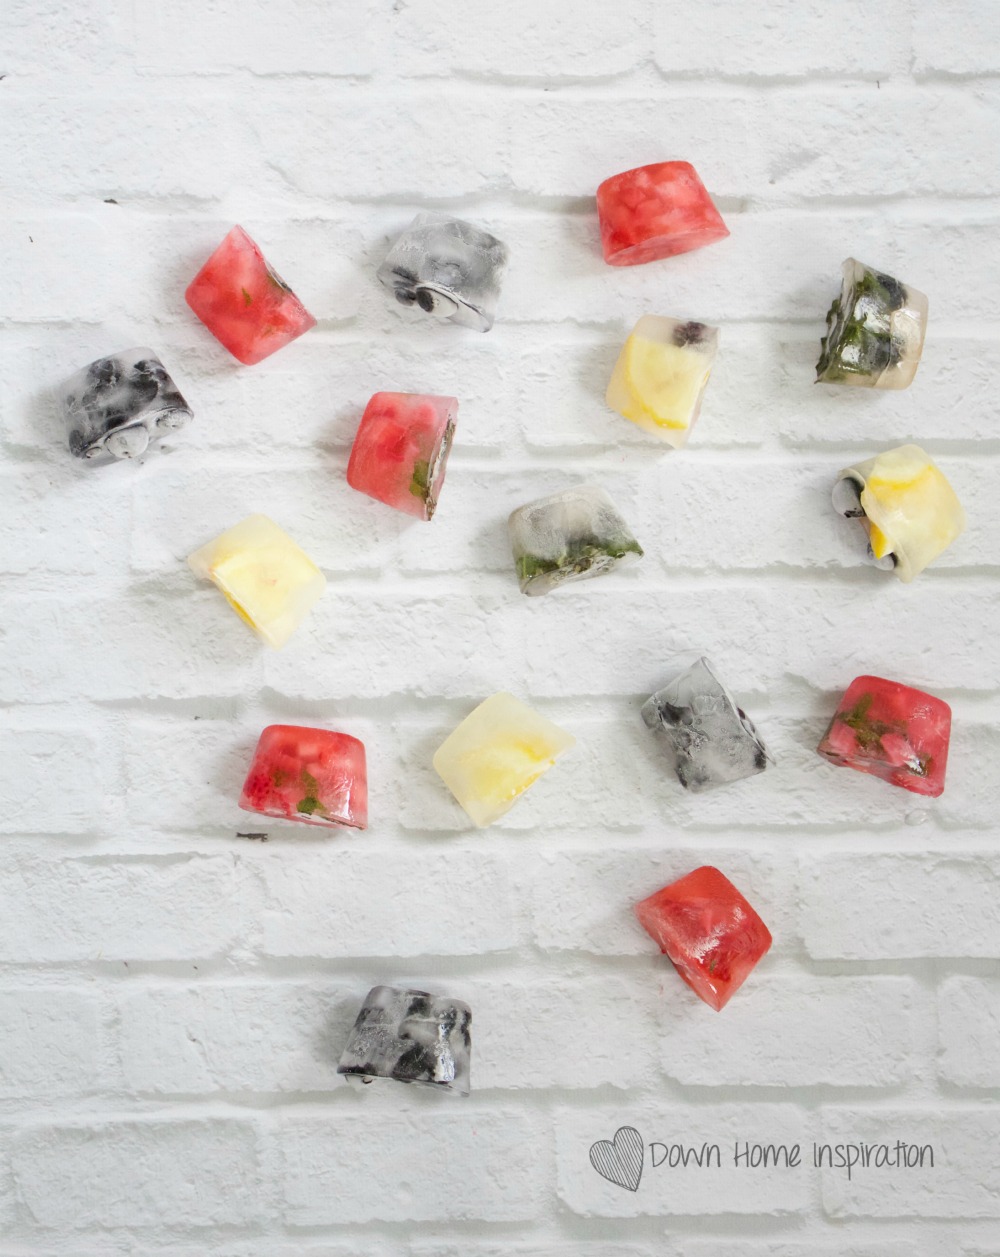 flavored-ice-cubes-9